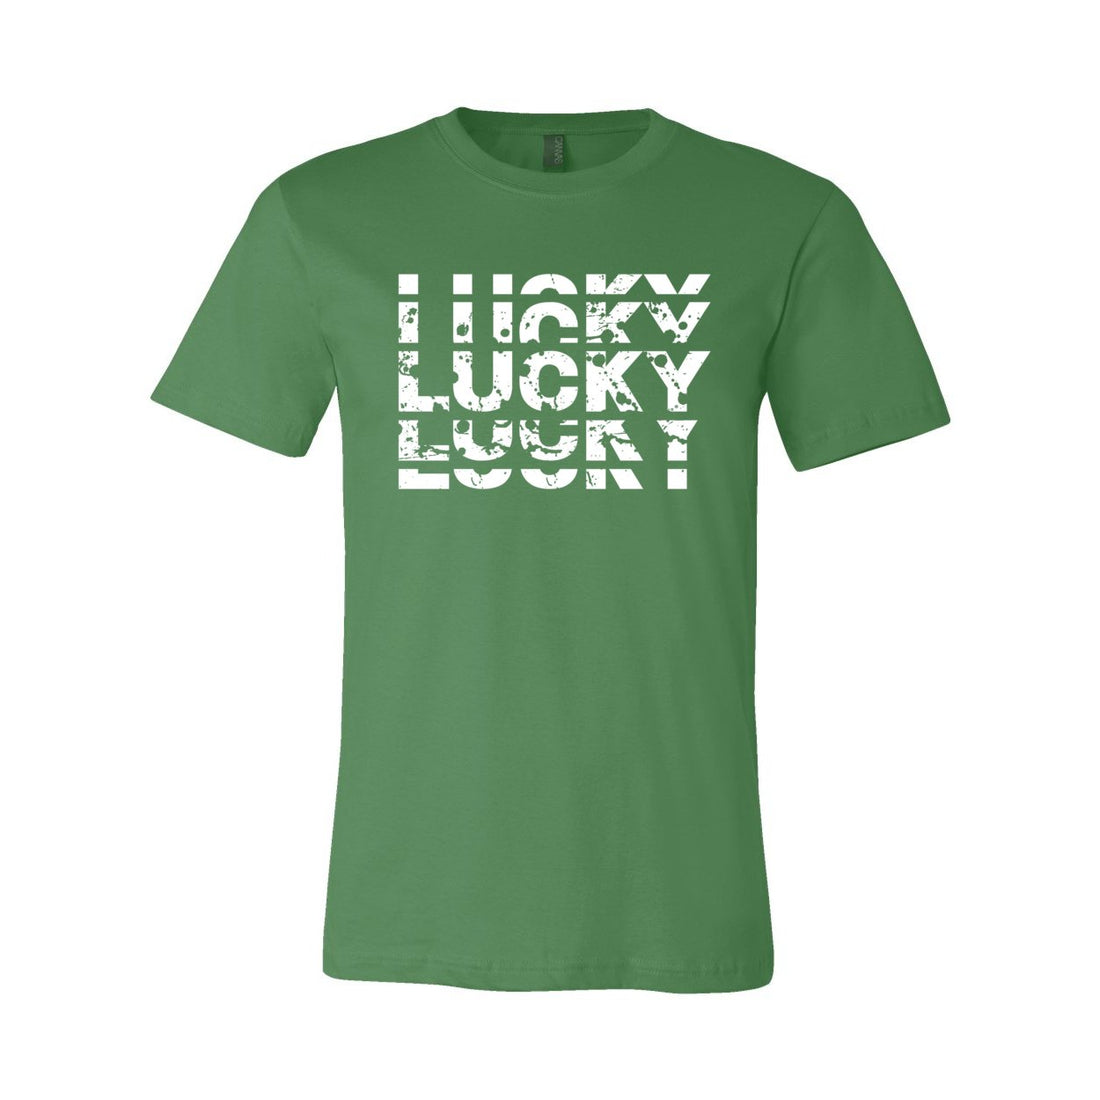 LUCKY Sleeve Jersey Tee - T-Shirts - Positively Sassy - LUCKY Sleeve Jersey Tee